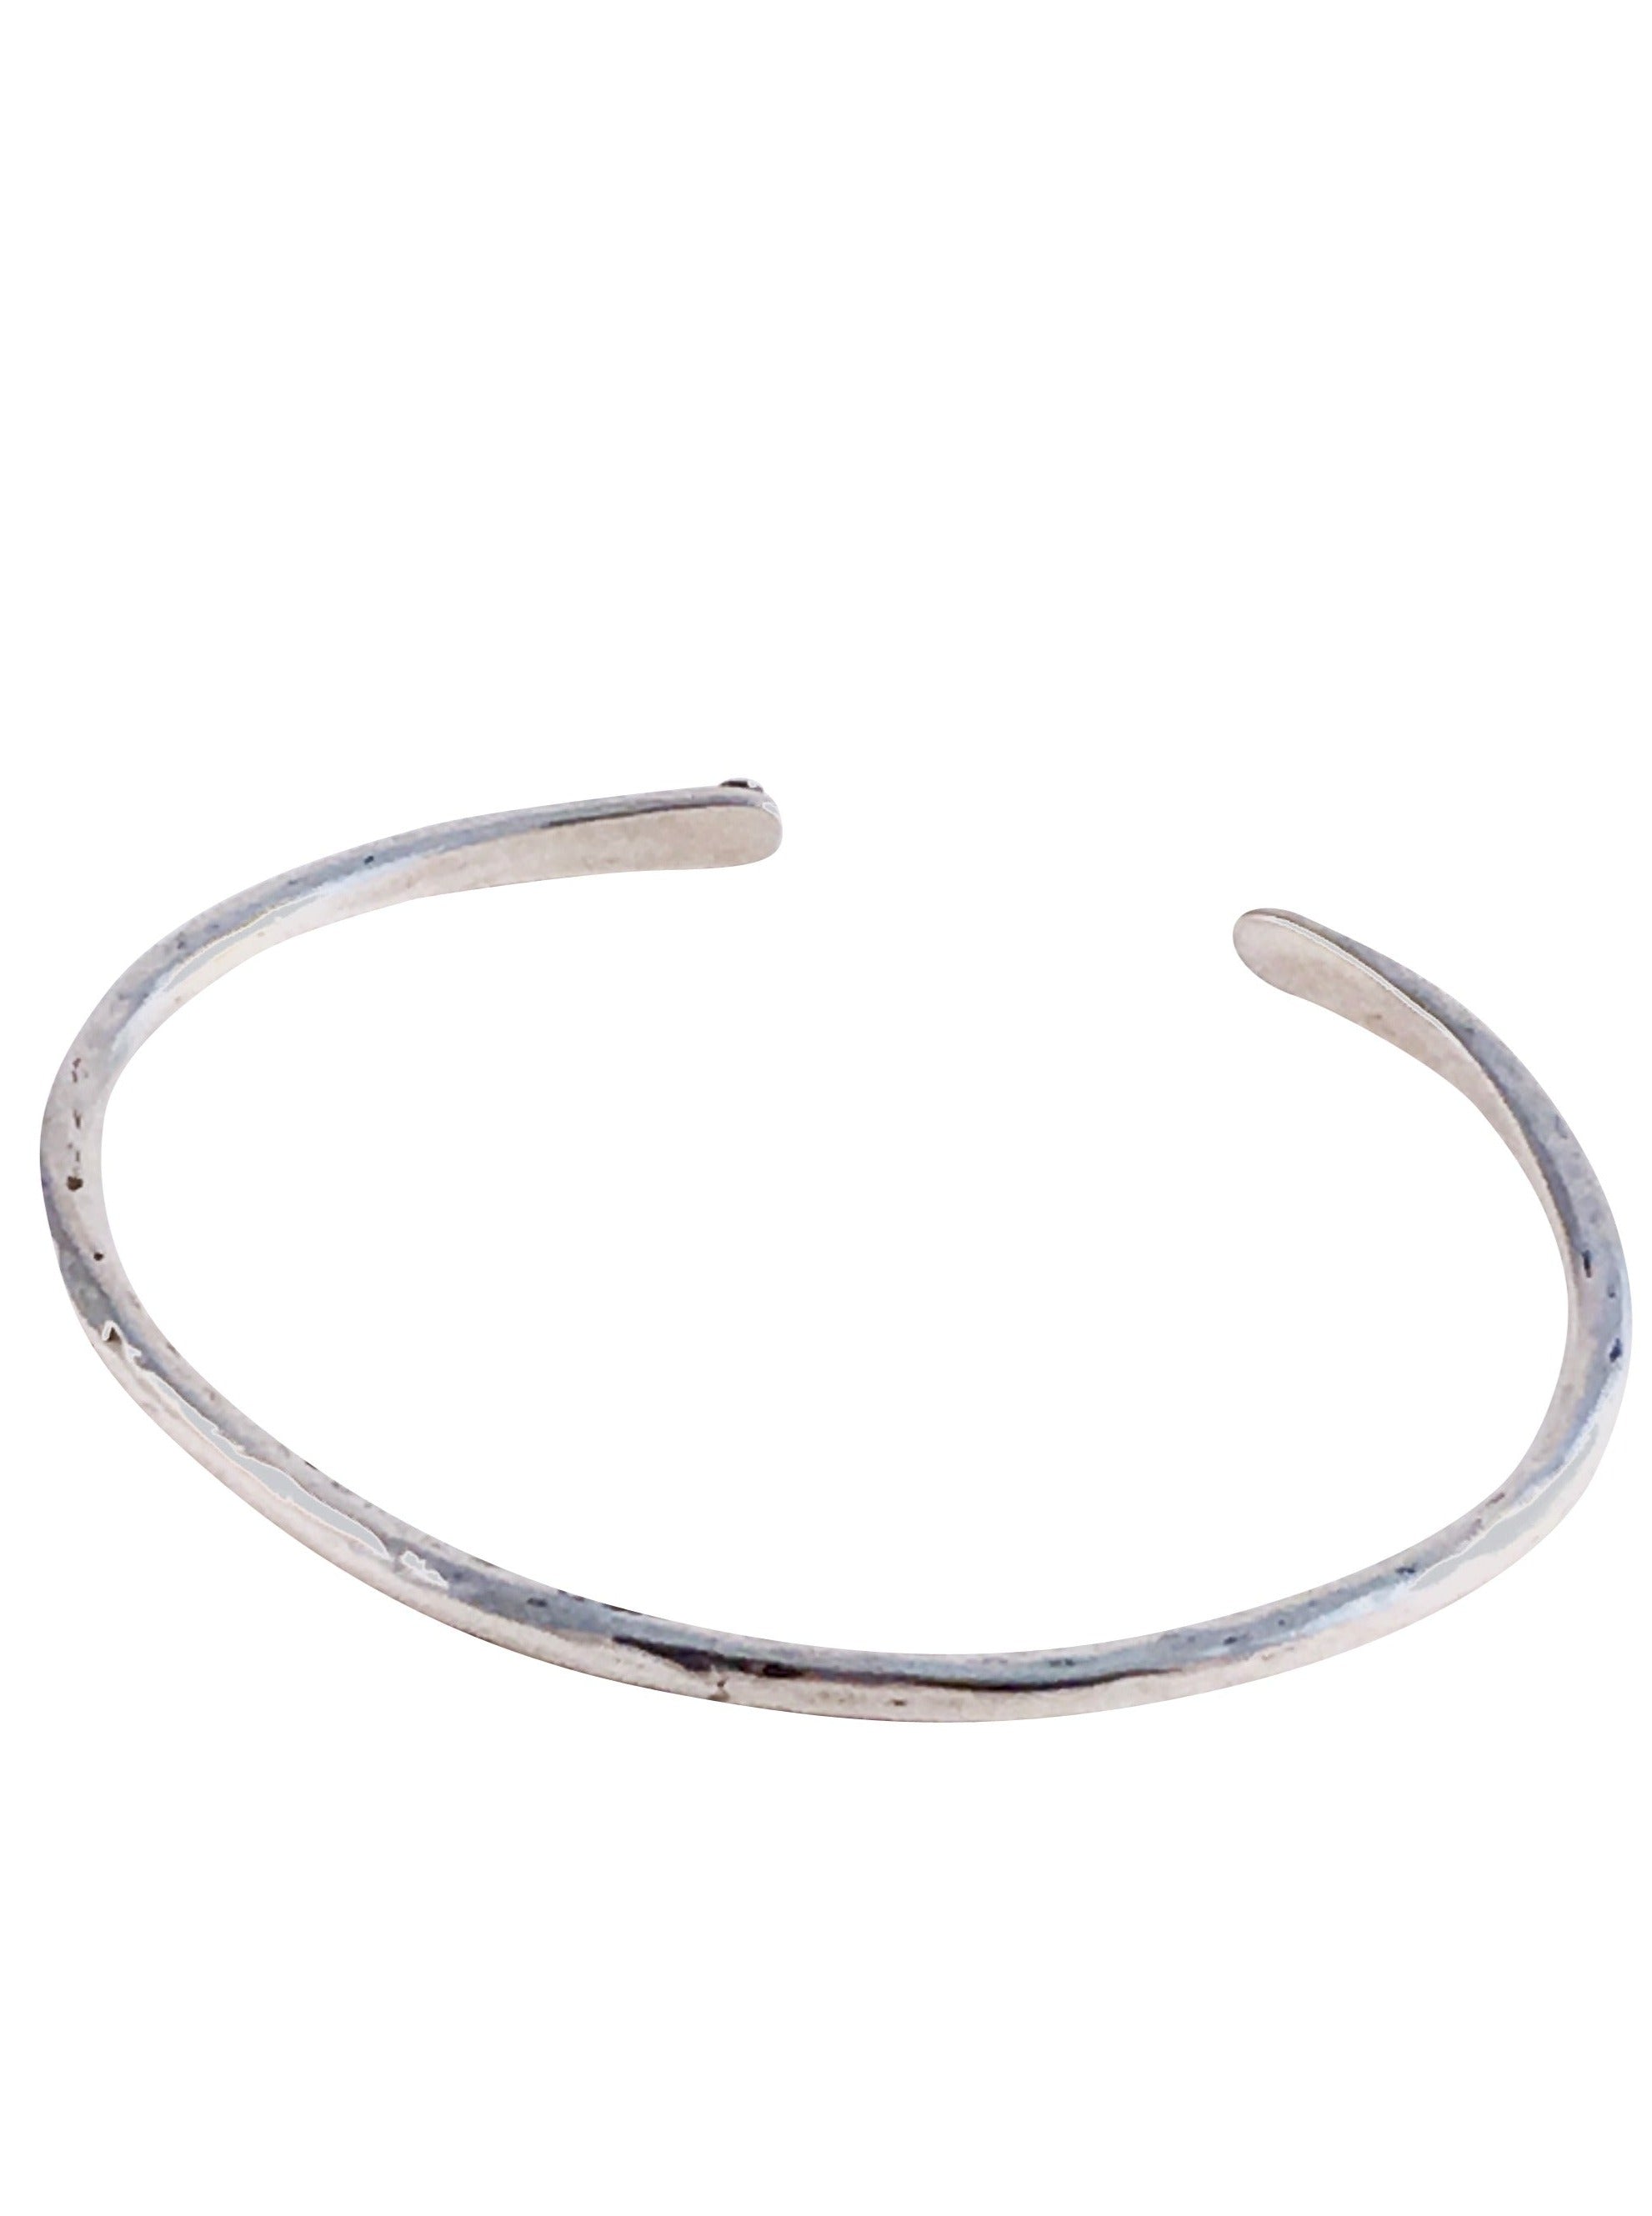 Hand Forged Sterling Cuff Bracelet